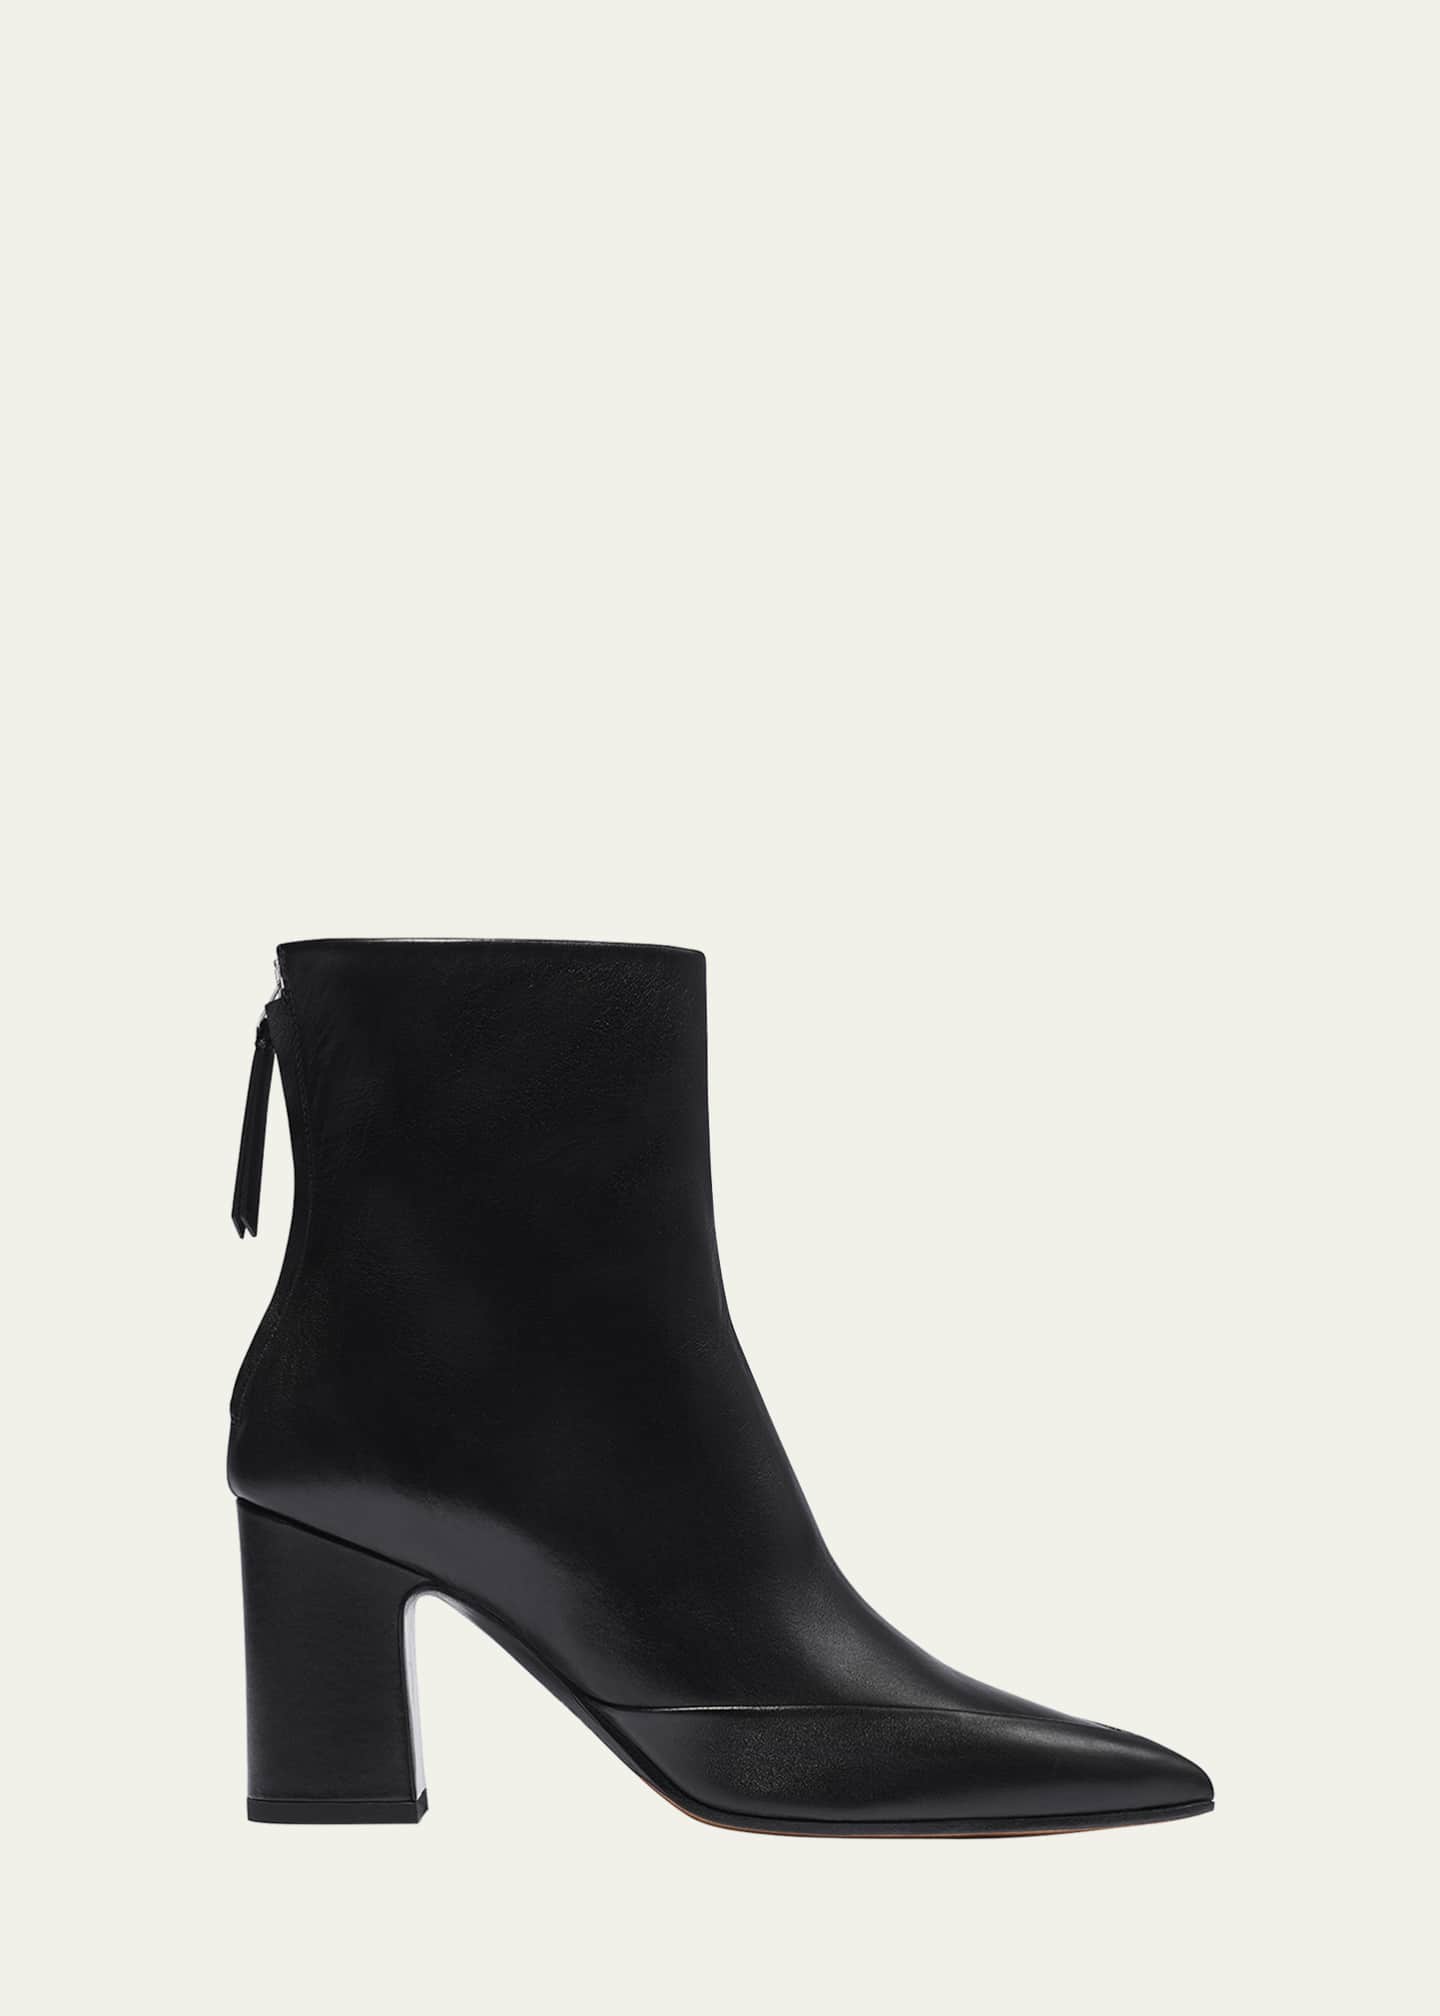 Emme Parsons Majic 80mm Leather Booties - Bergdorf Goodman